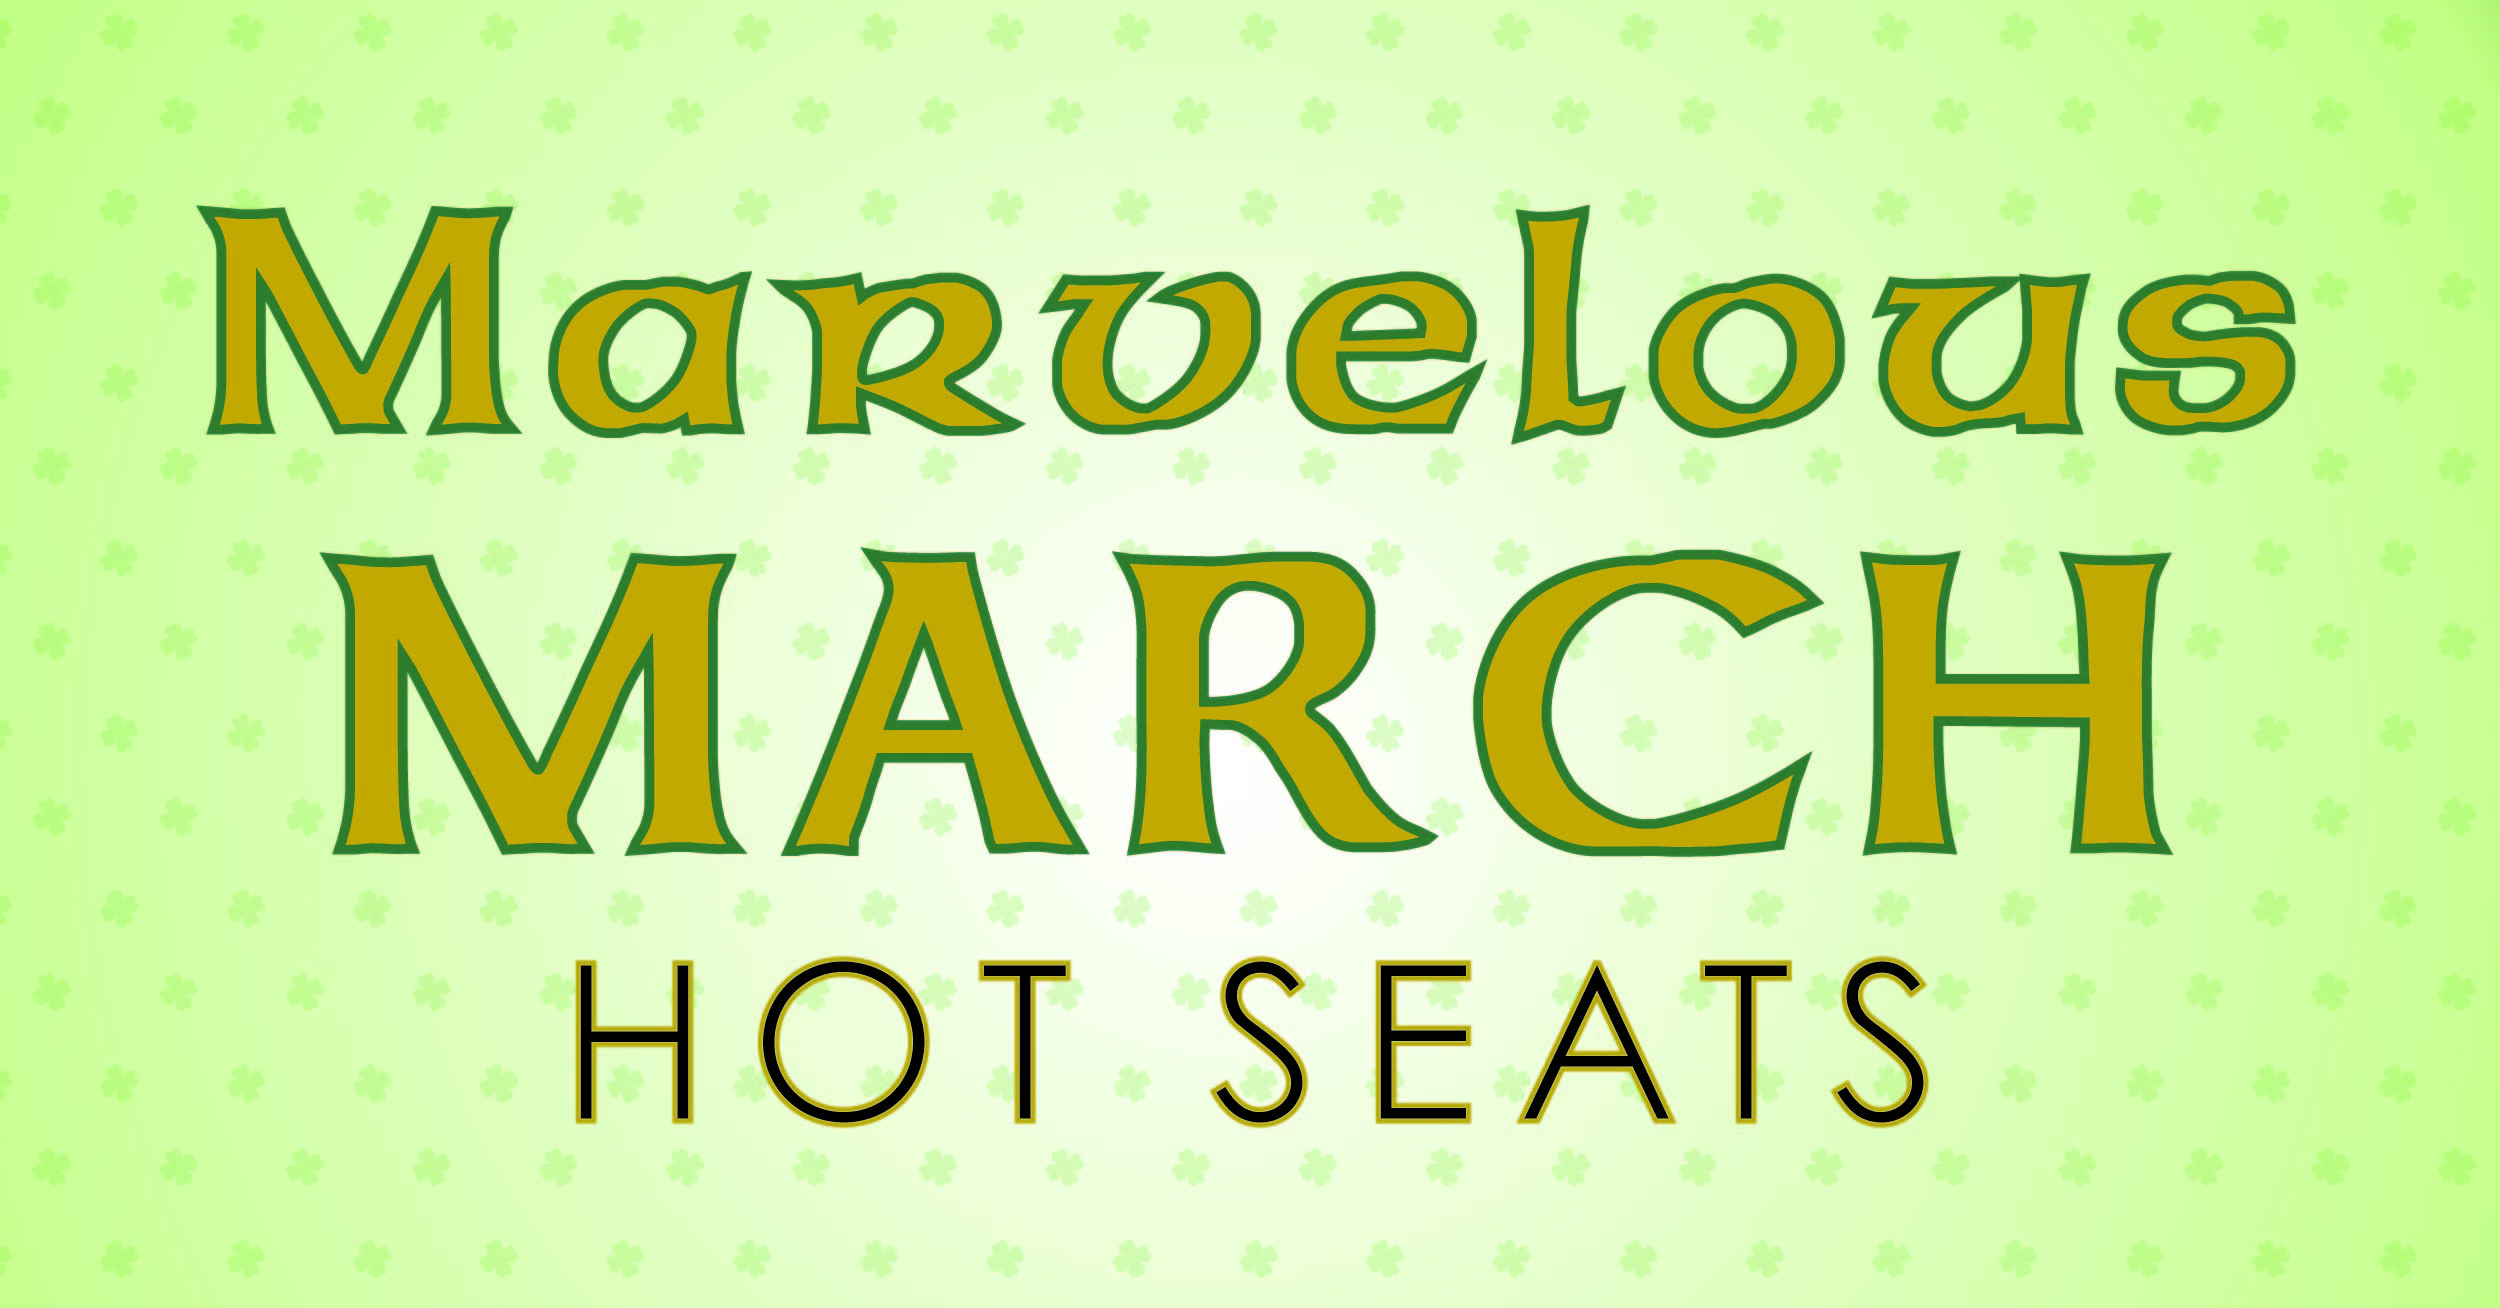 MARVELOUS MARCH HOT SEATS